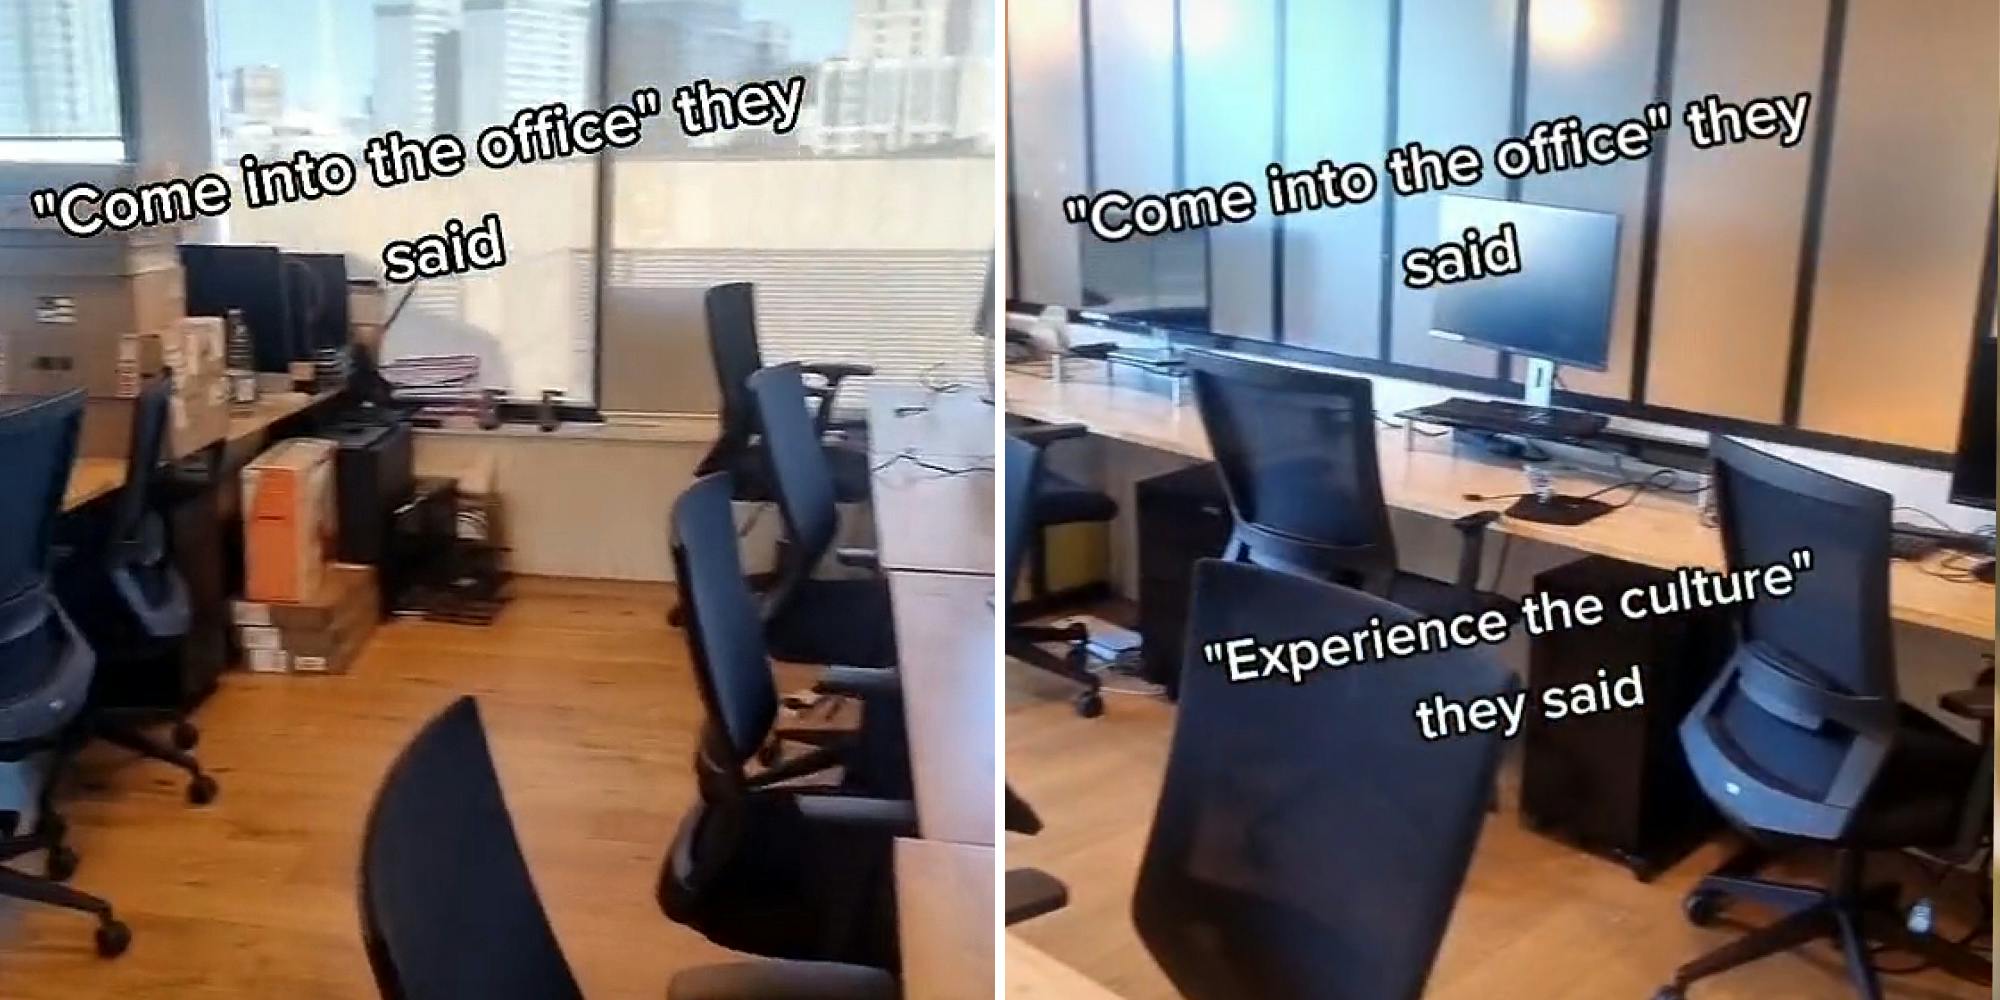 Empty office chairs in office caption "Come into office they said" (l) empty office chairs in office caption "Come into the office they said" "Experience the culture they said" (r)